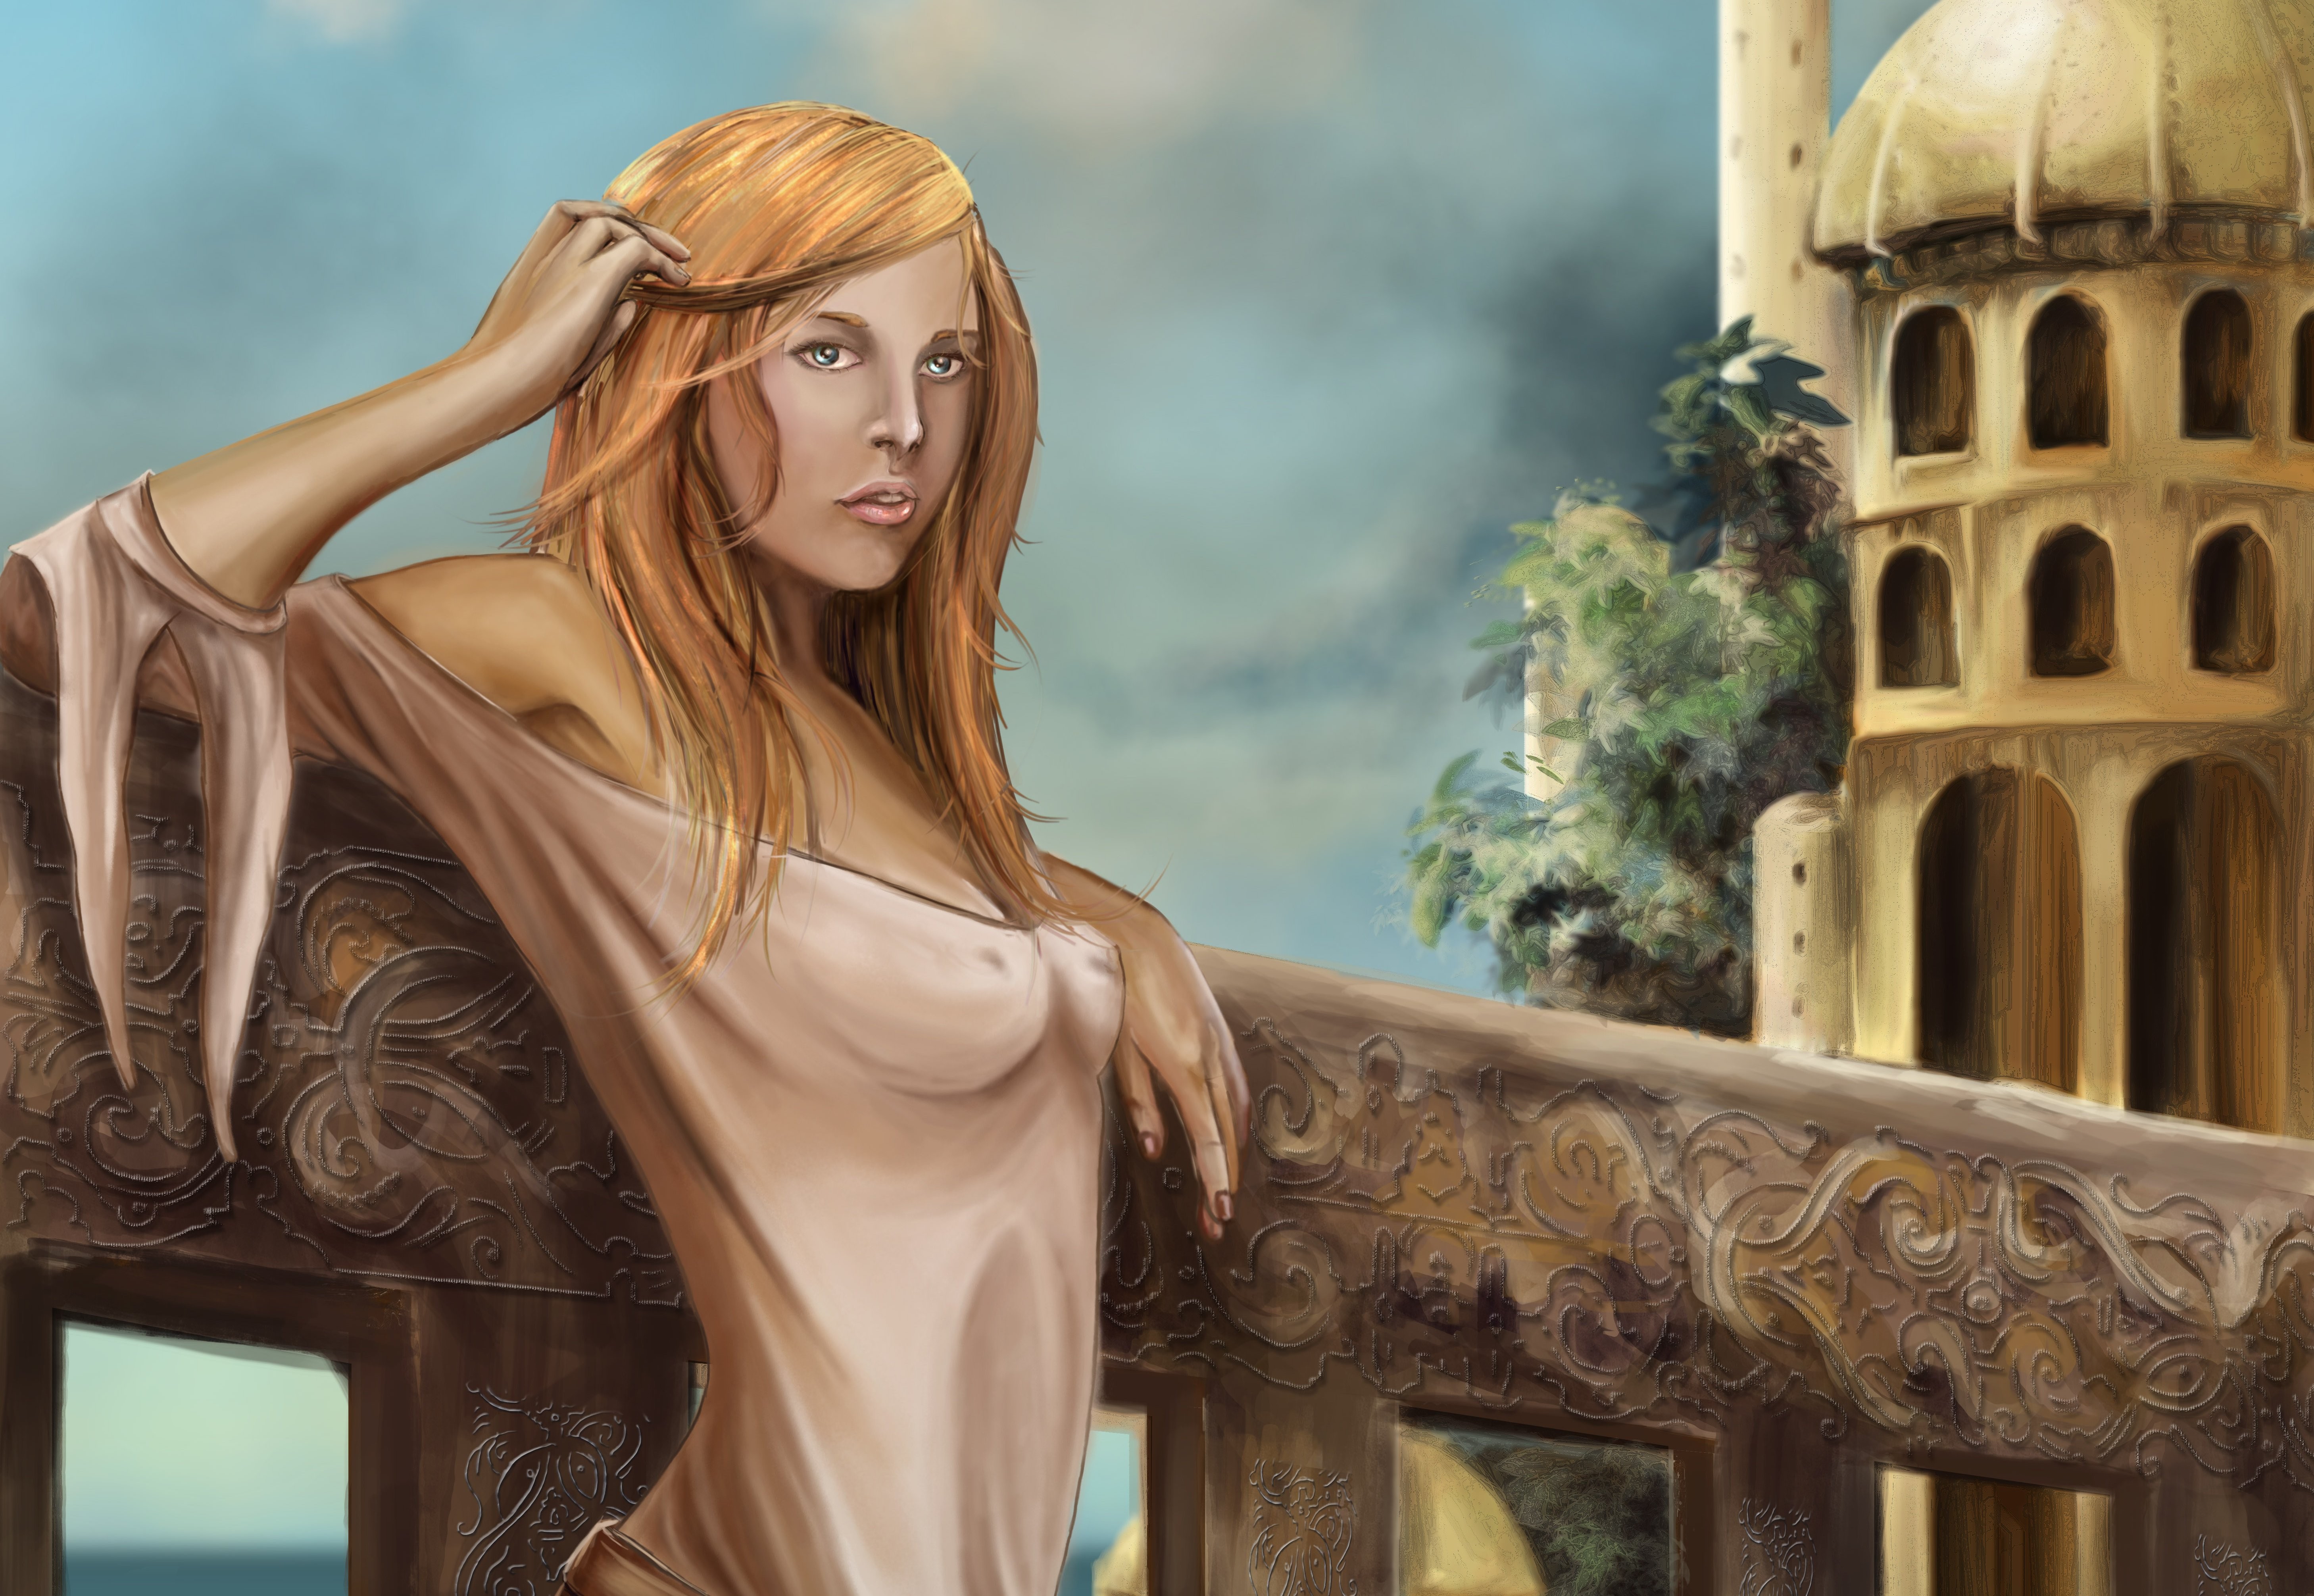 General 5832x4022 women artwork Aviendha The Wheel of Time fantasy art boobs blonde arms up leaning looking into the distance fantasy girl